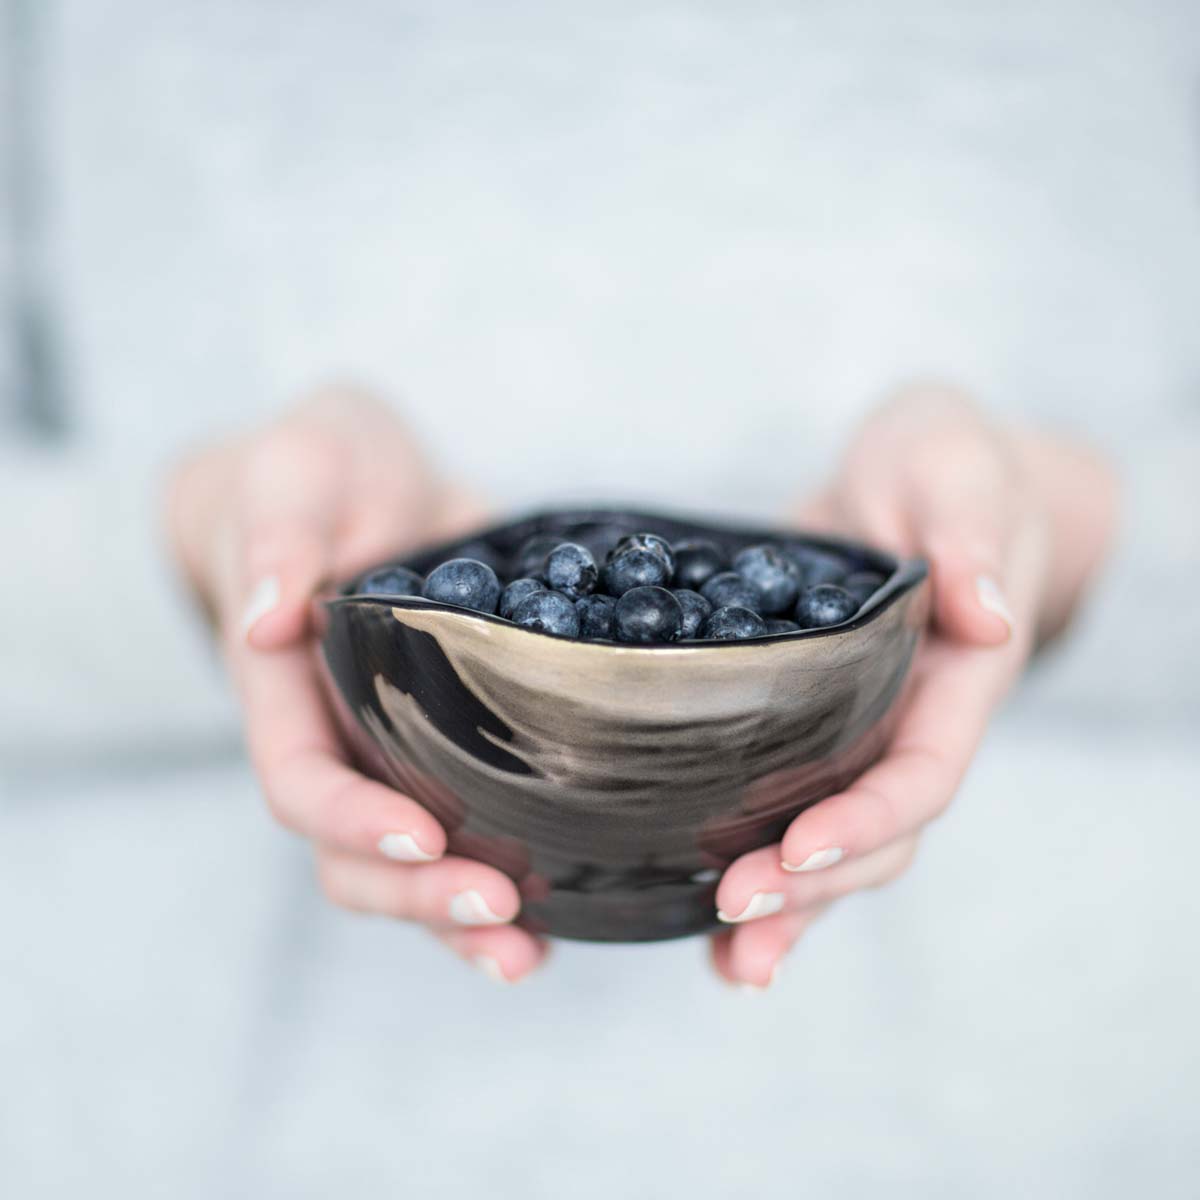 anna tableware designer, Reese is a bowl artistically designed with a mix of mysterious deep night blue and royal matte gold colours